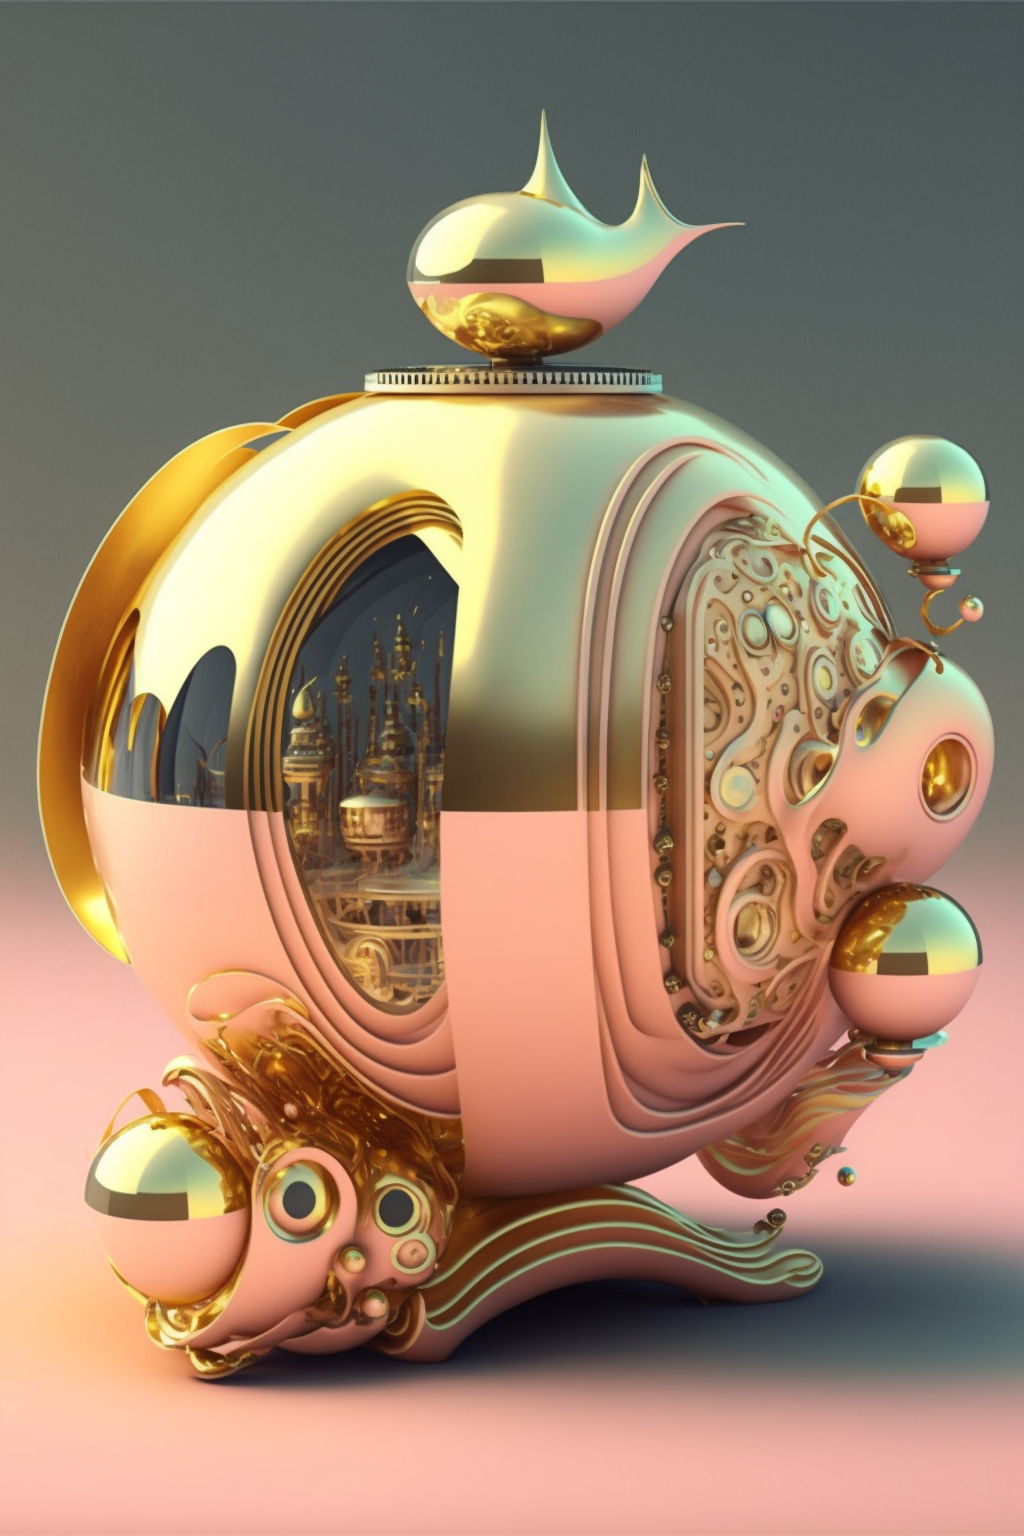 Luxury in the style of Stylized Blobby-Futurism 4